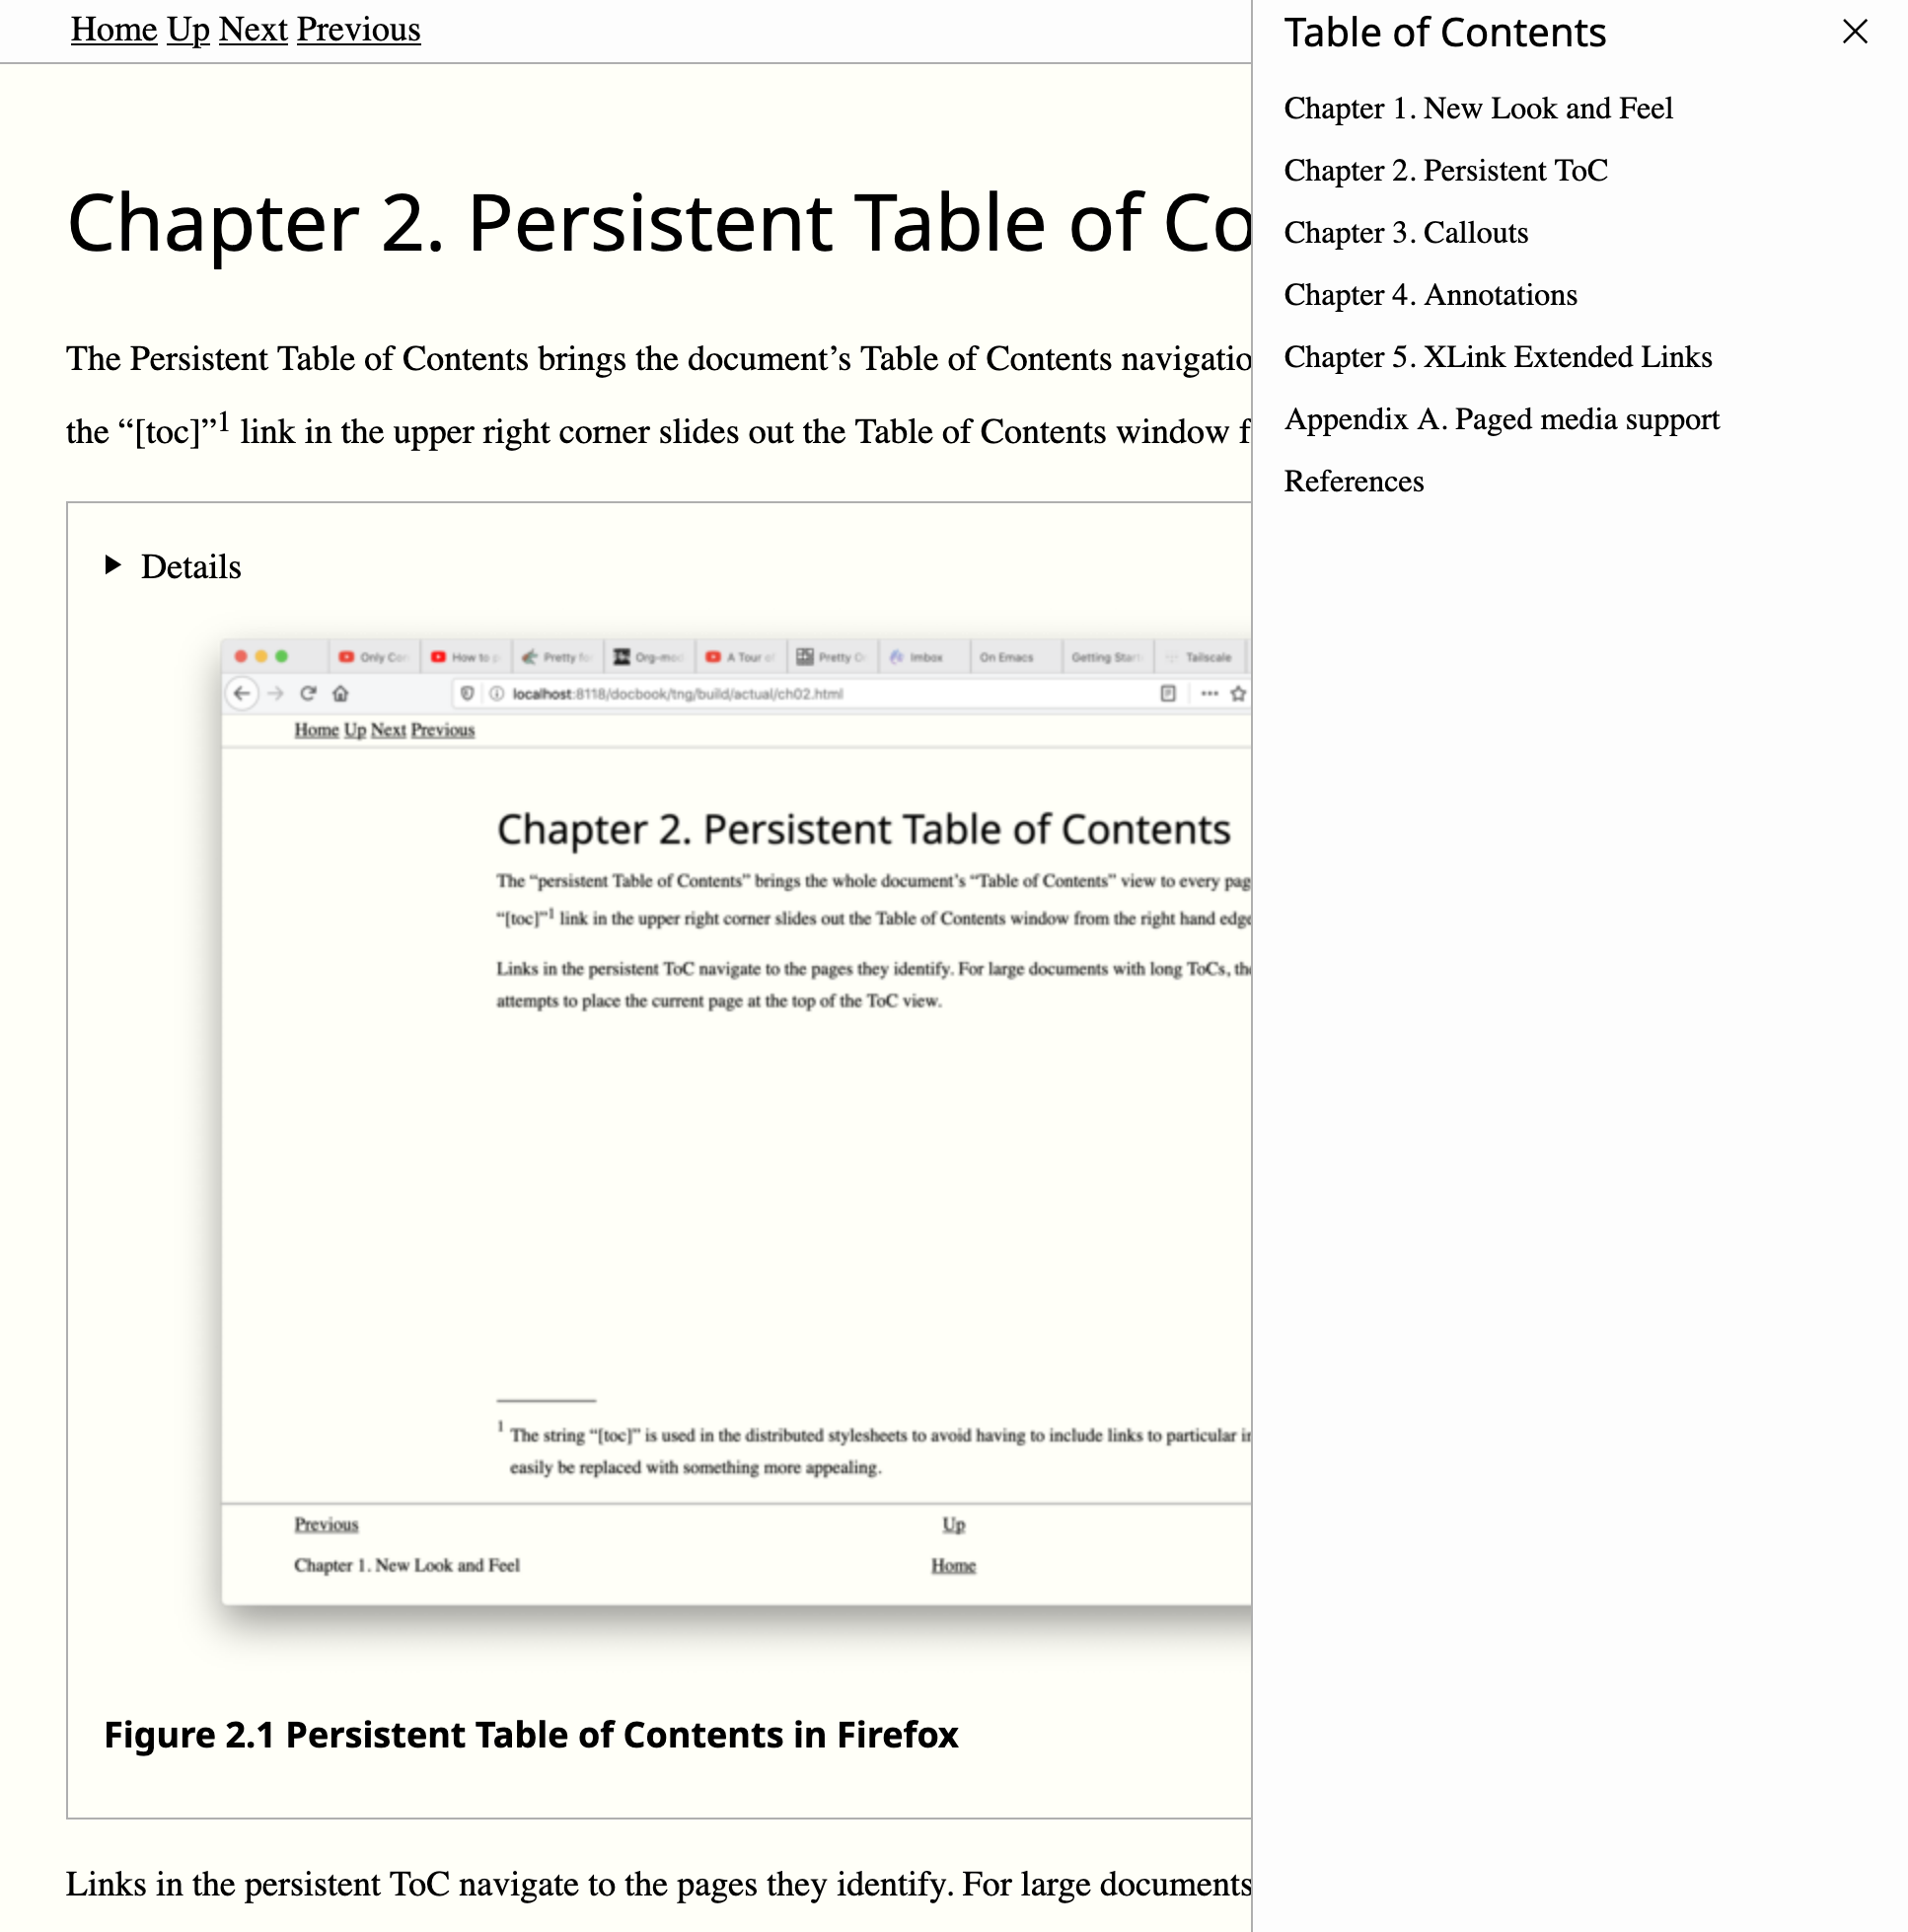 Screenshot of a rendered DocBook chapter.